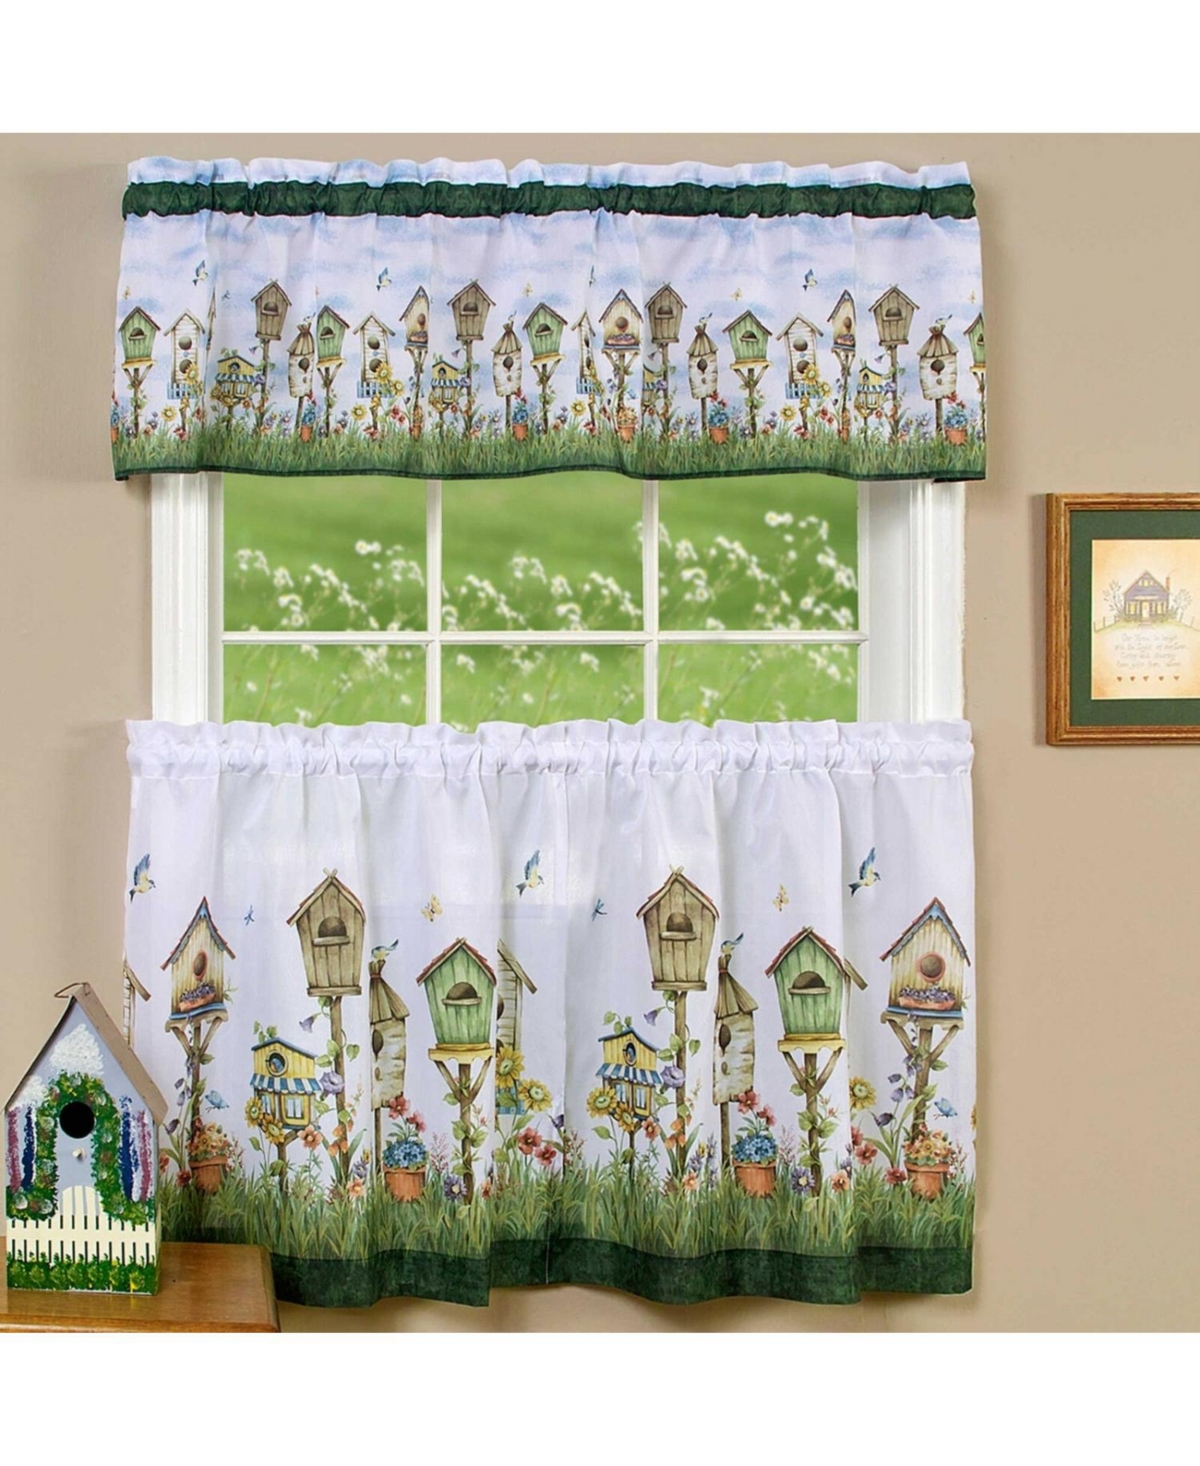 Home Sweet Home Complete 3 Piece Kitchen Curtain Set - 58 in. W x 36 in. L - White